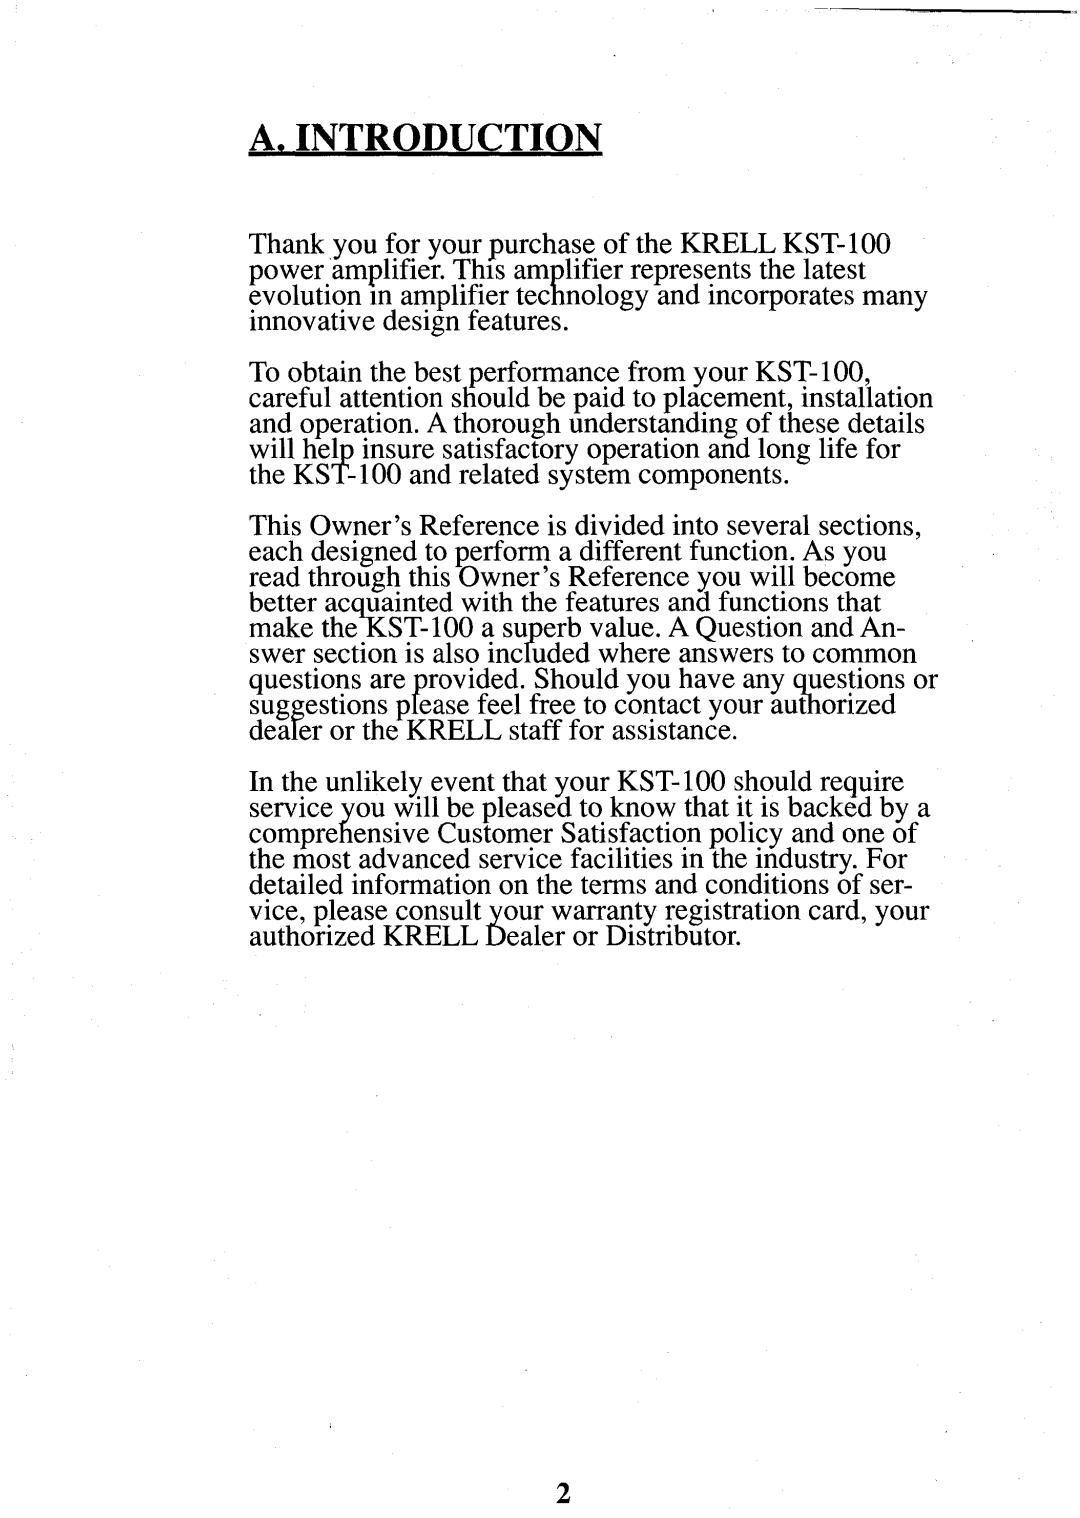 Krell Industries KST100 manual A, Introduction 